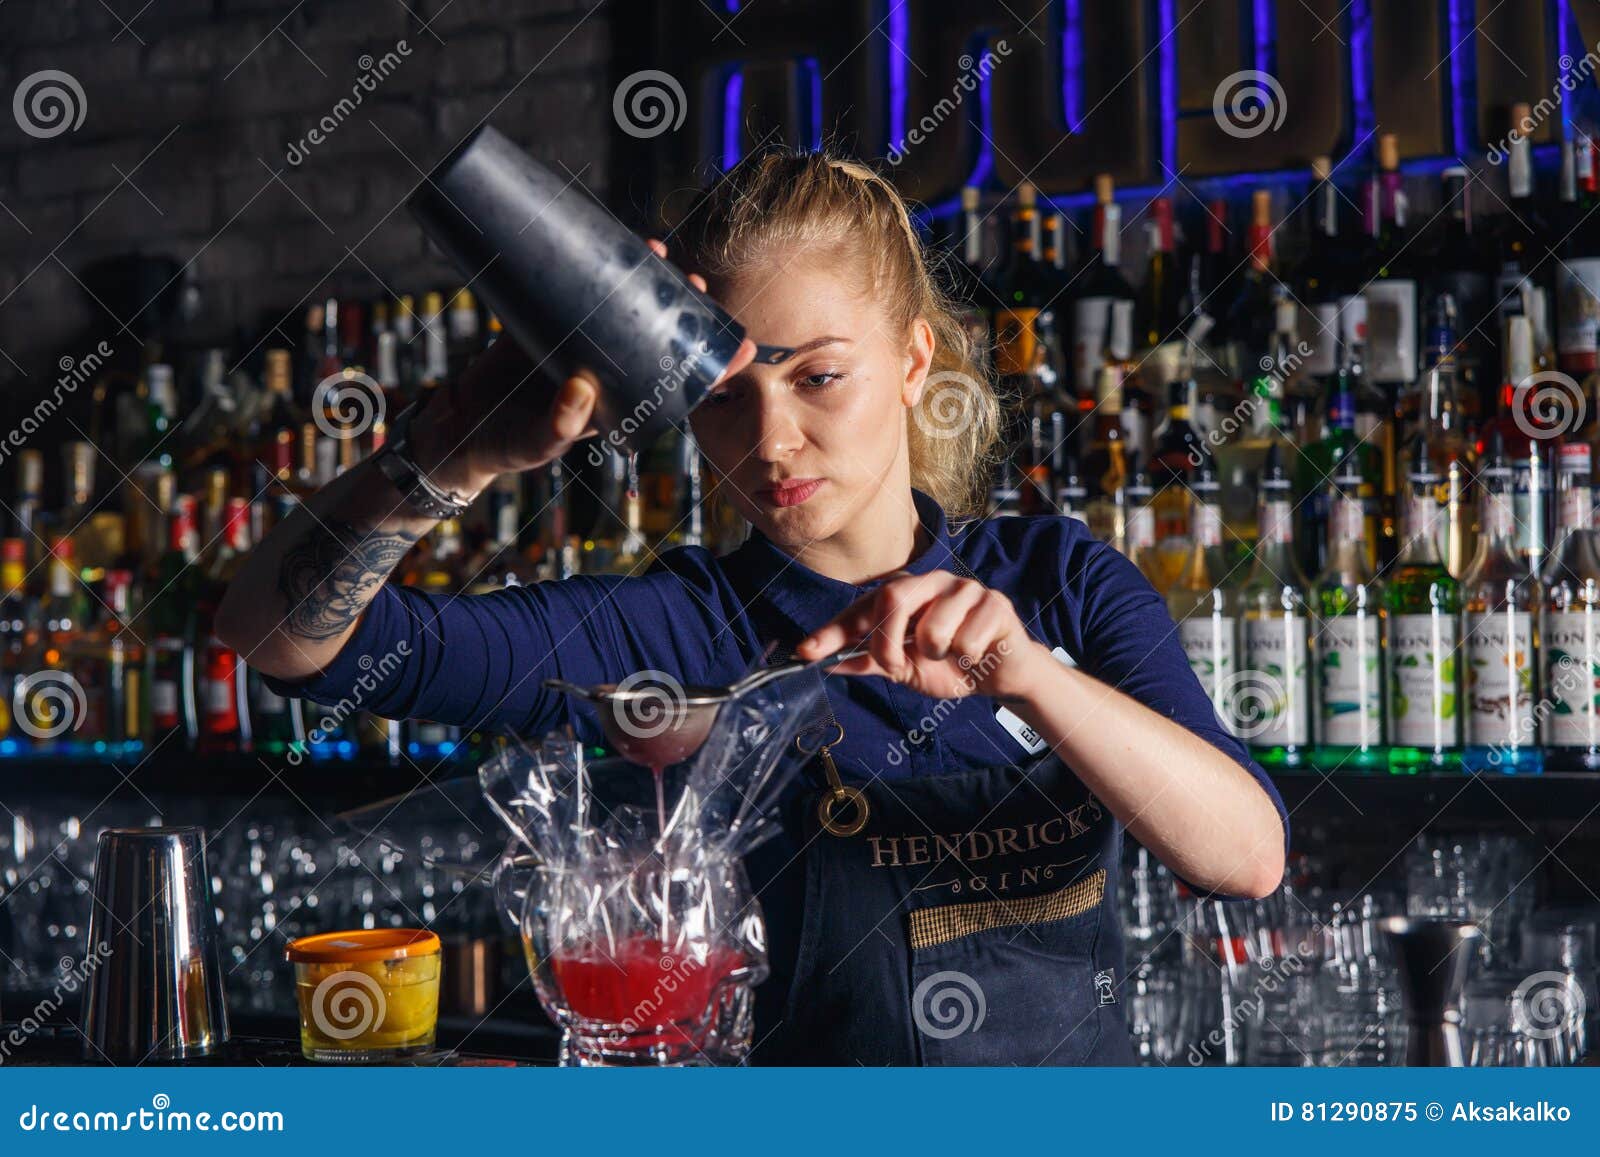 Woman Bartender Making an Alcohol Cocktail Editorial Image - Image of ...